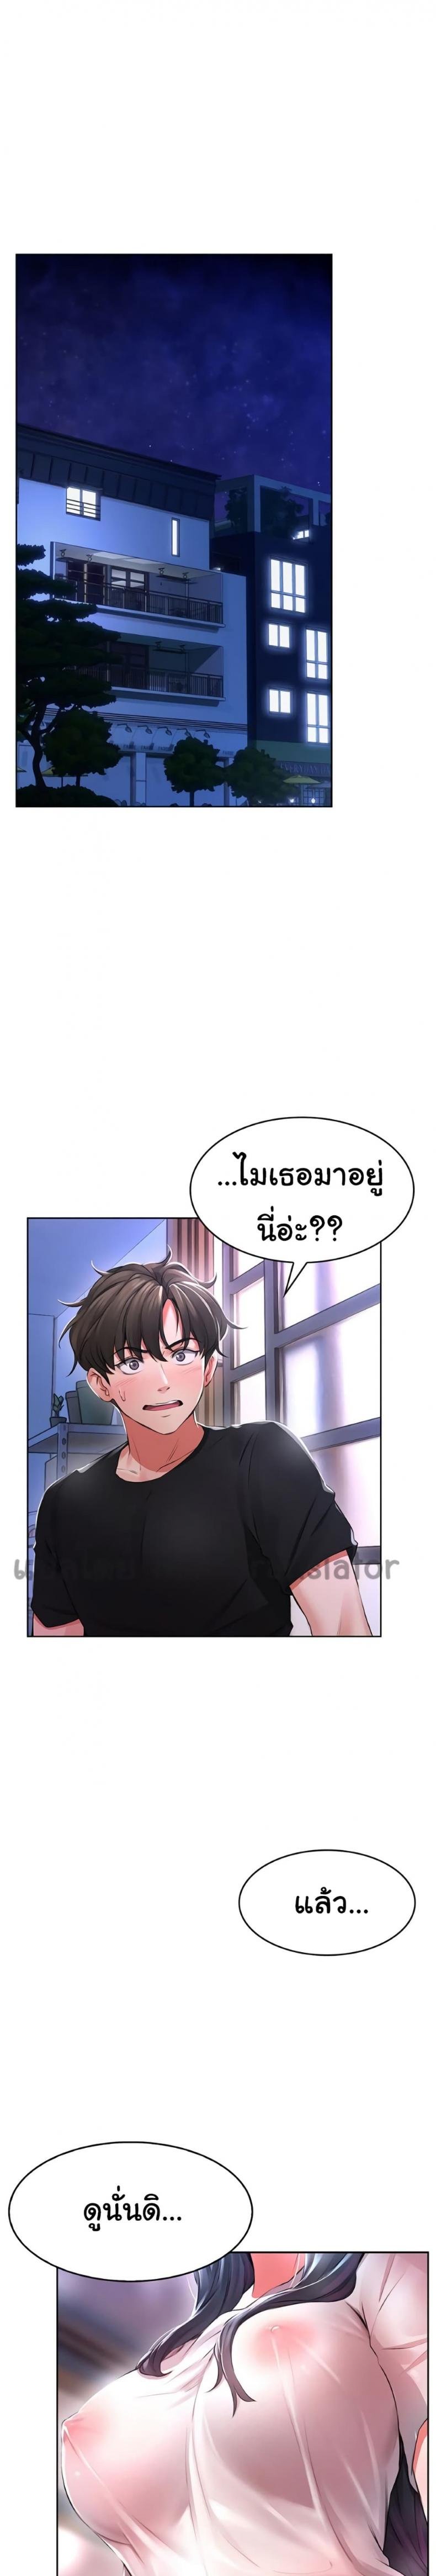 Not Safe for Work 2 ภาพที่ 3